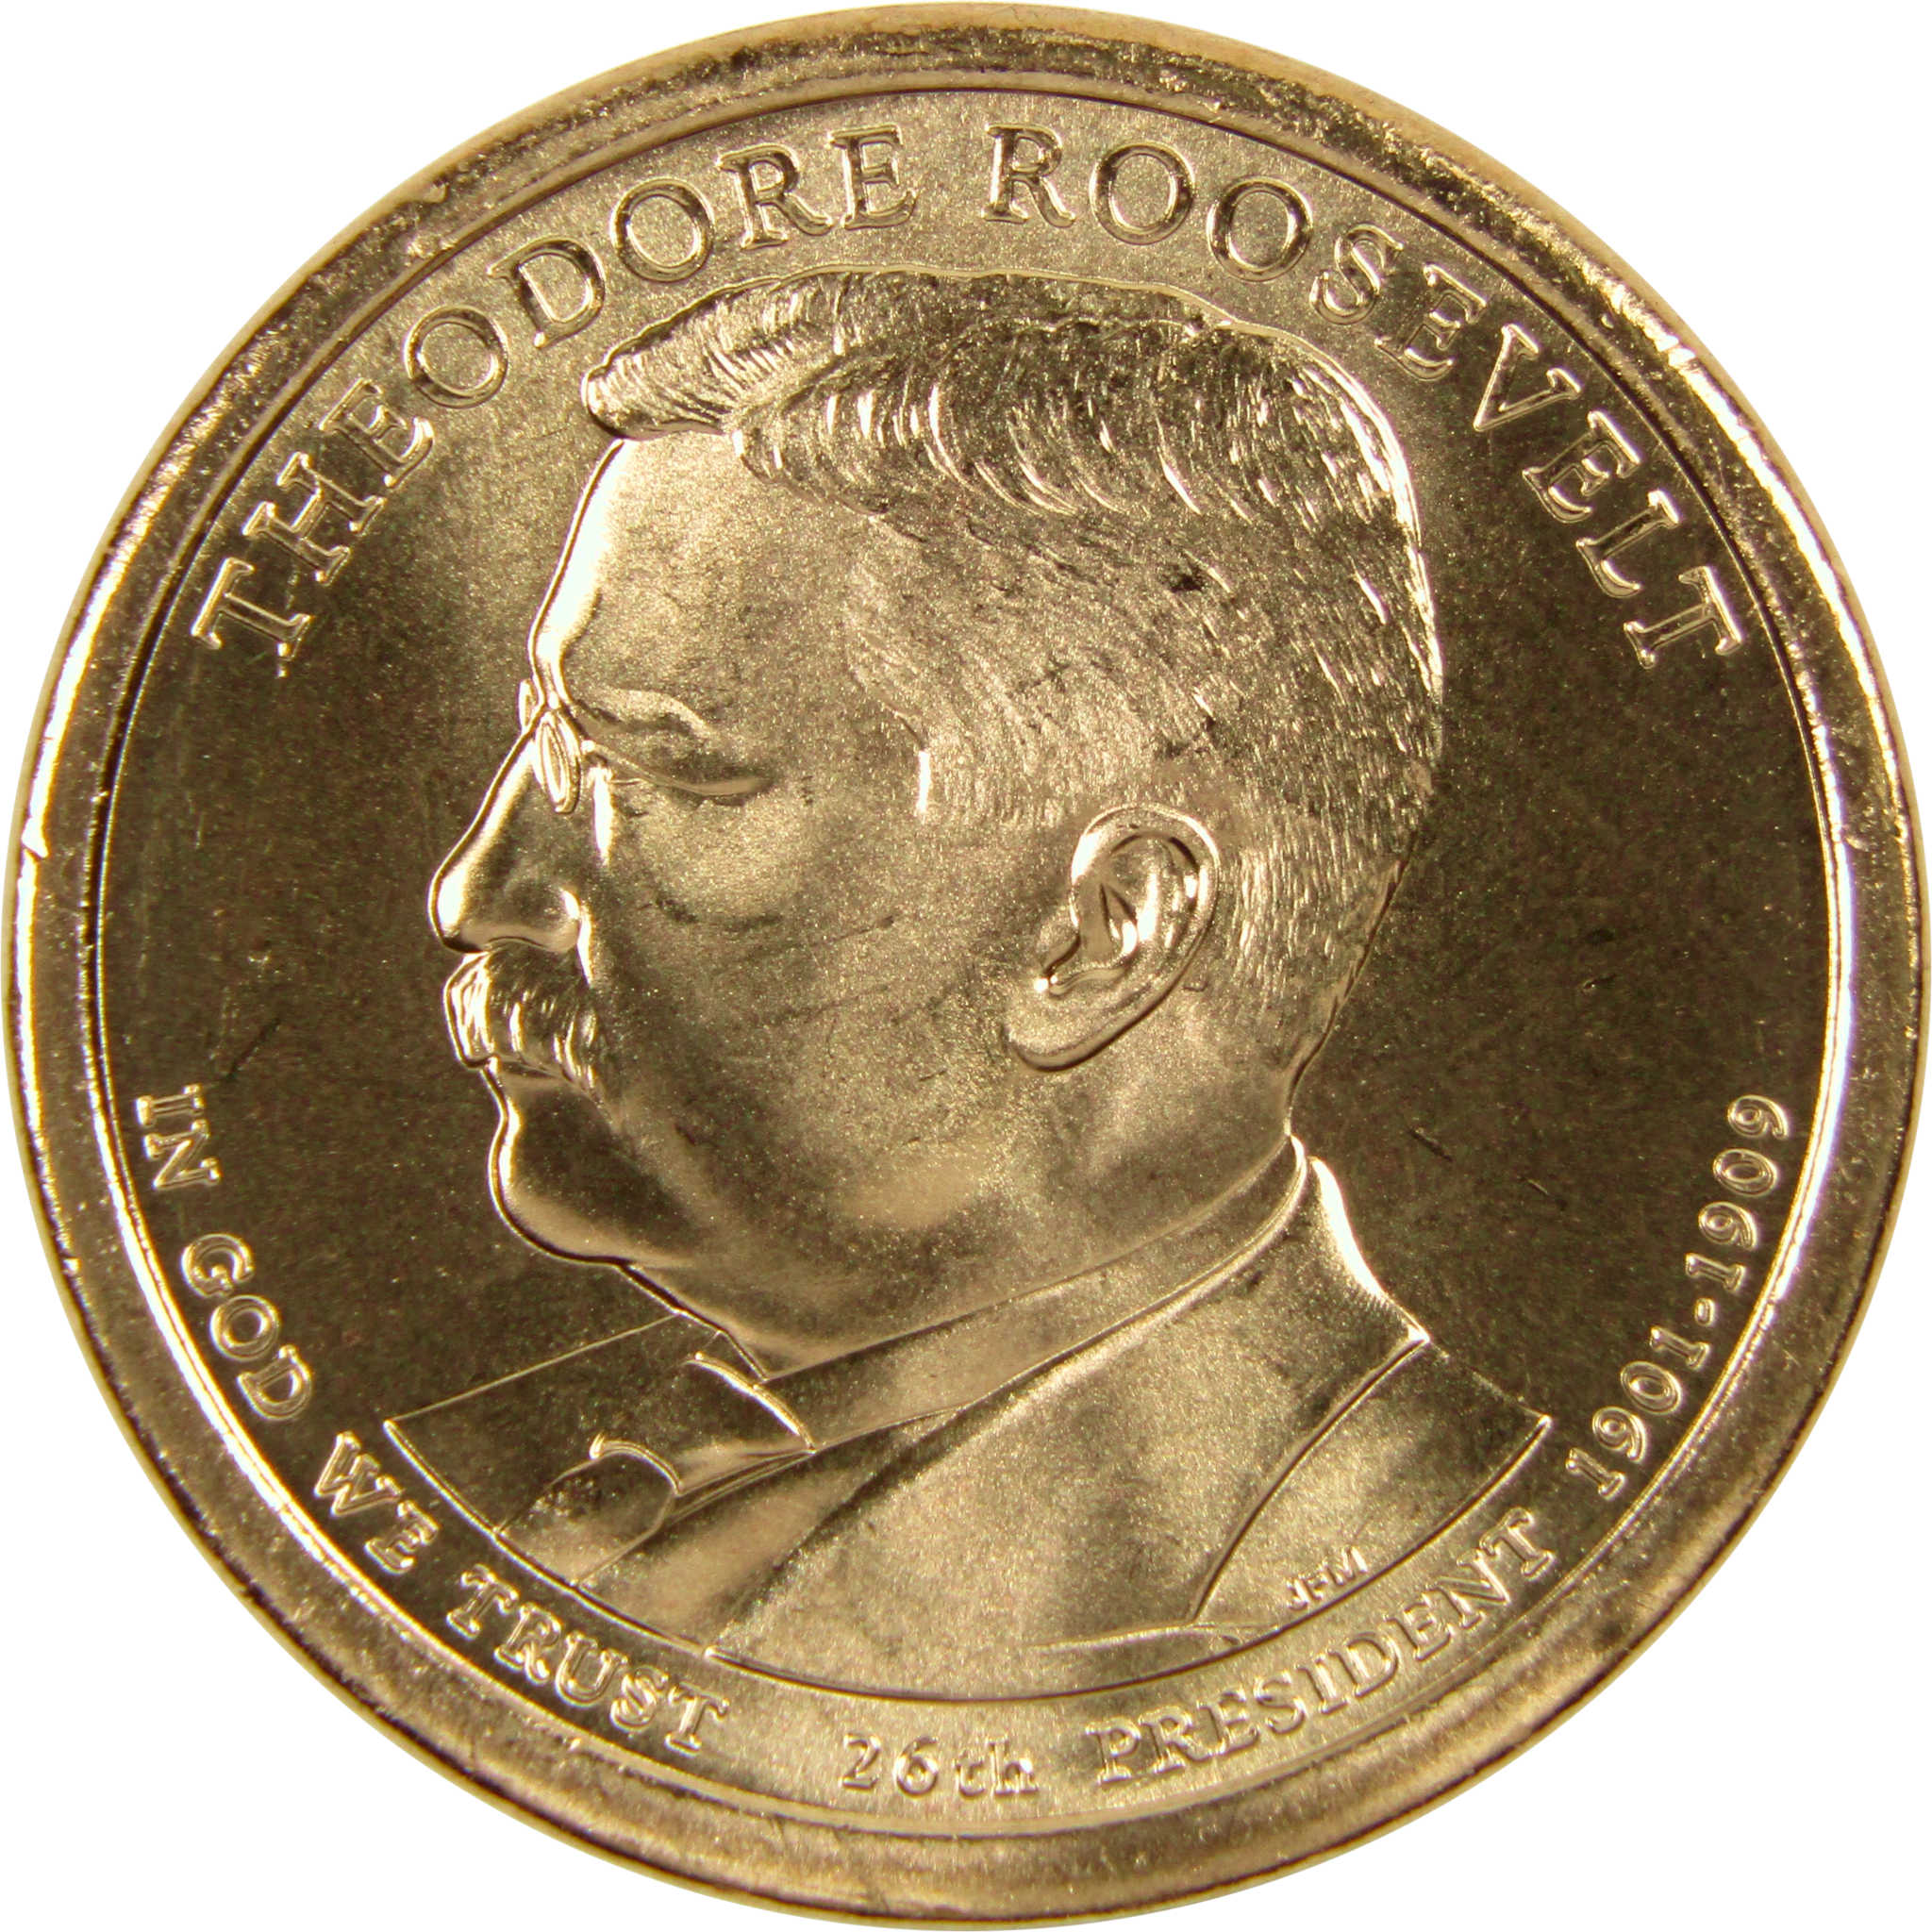 2013 P Theodore Roosevelt Presidential Dollar BU Uncirculated $1 Coin